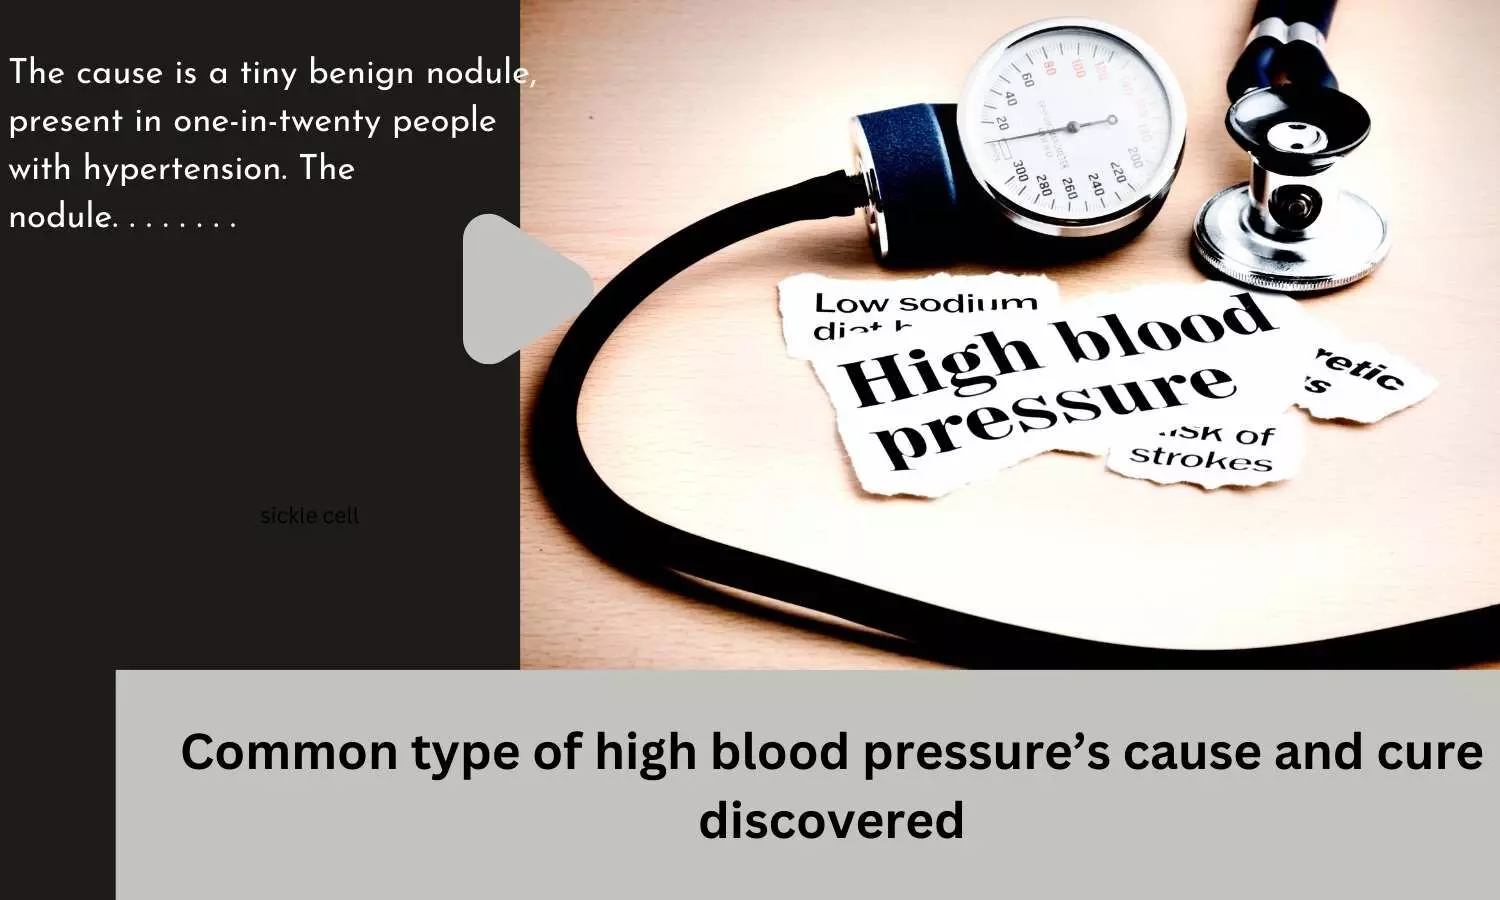 Common type of high blood pressures cause and cure discovered